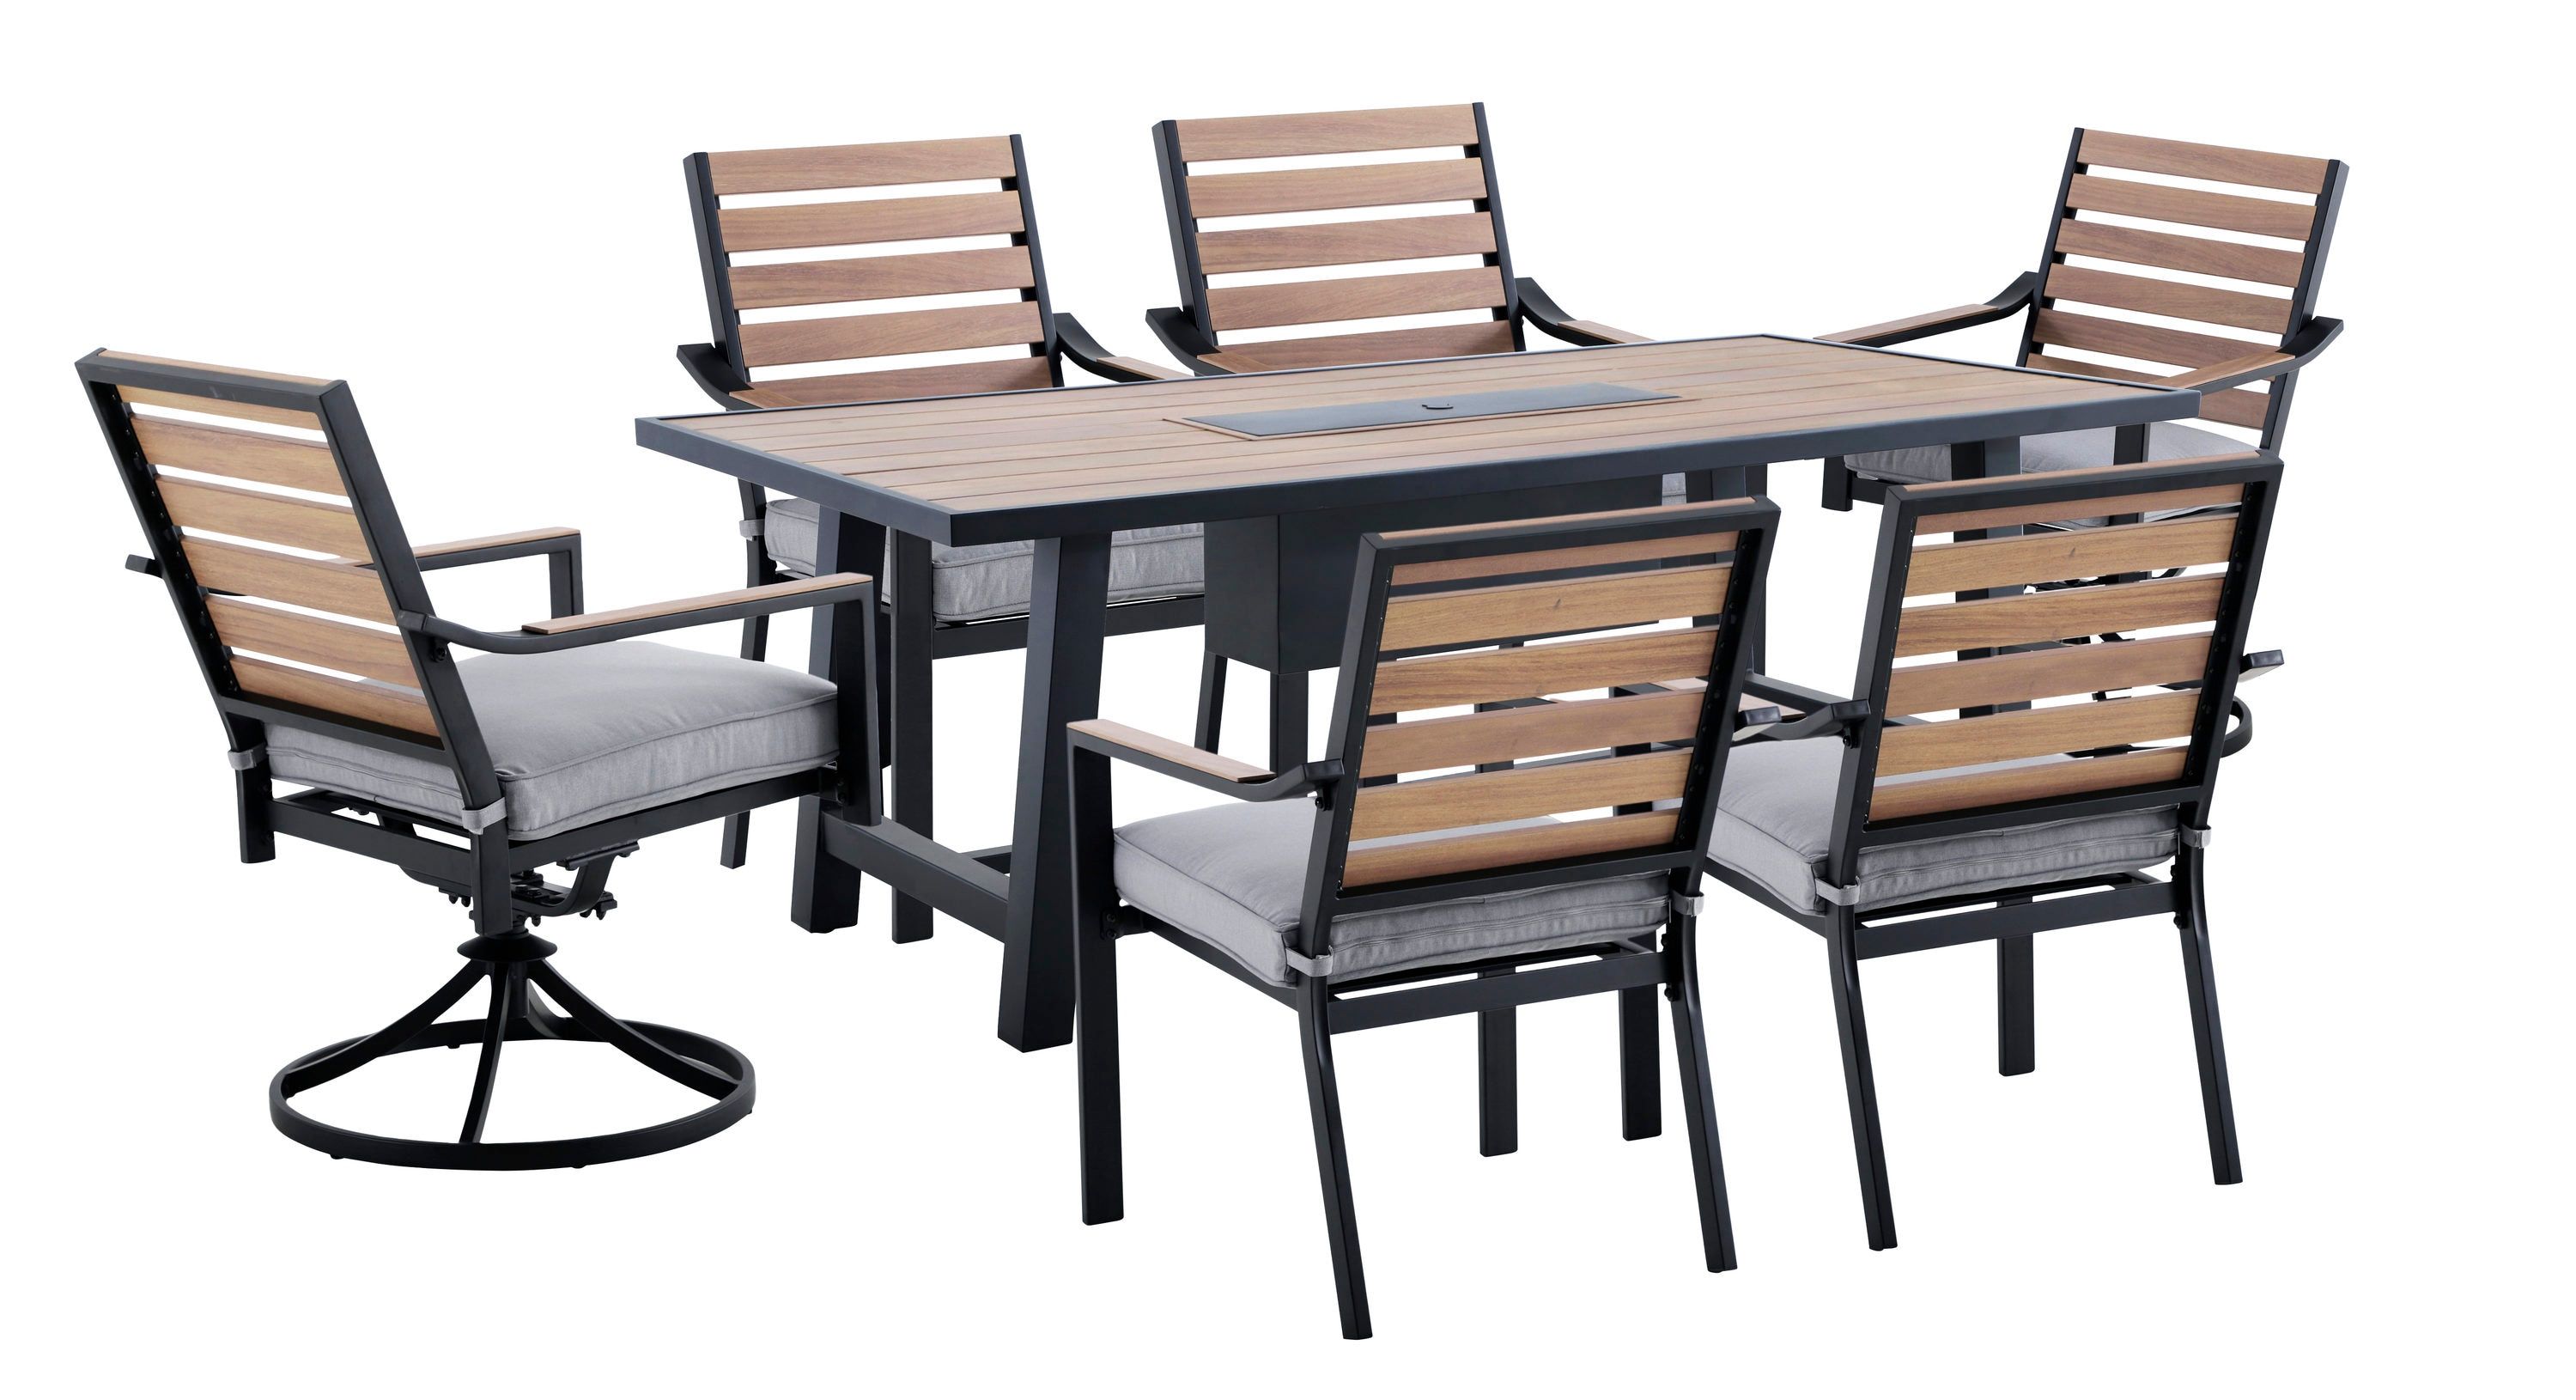 Shop Allen + Roth Fairway Oaks 7 Piece Patio Dining Set At Lowes Within Oaks Table Set With Patio Cover (View 13 of 15)